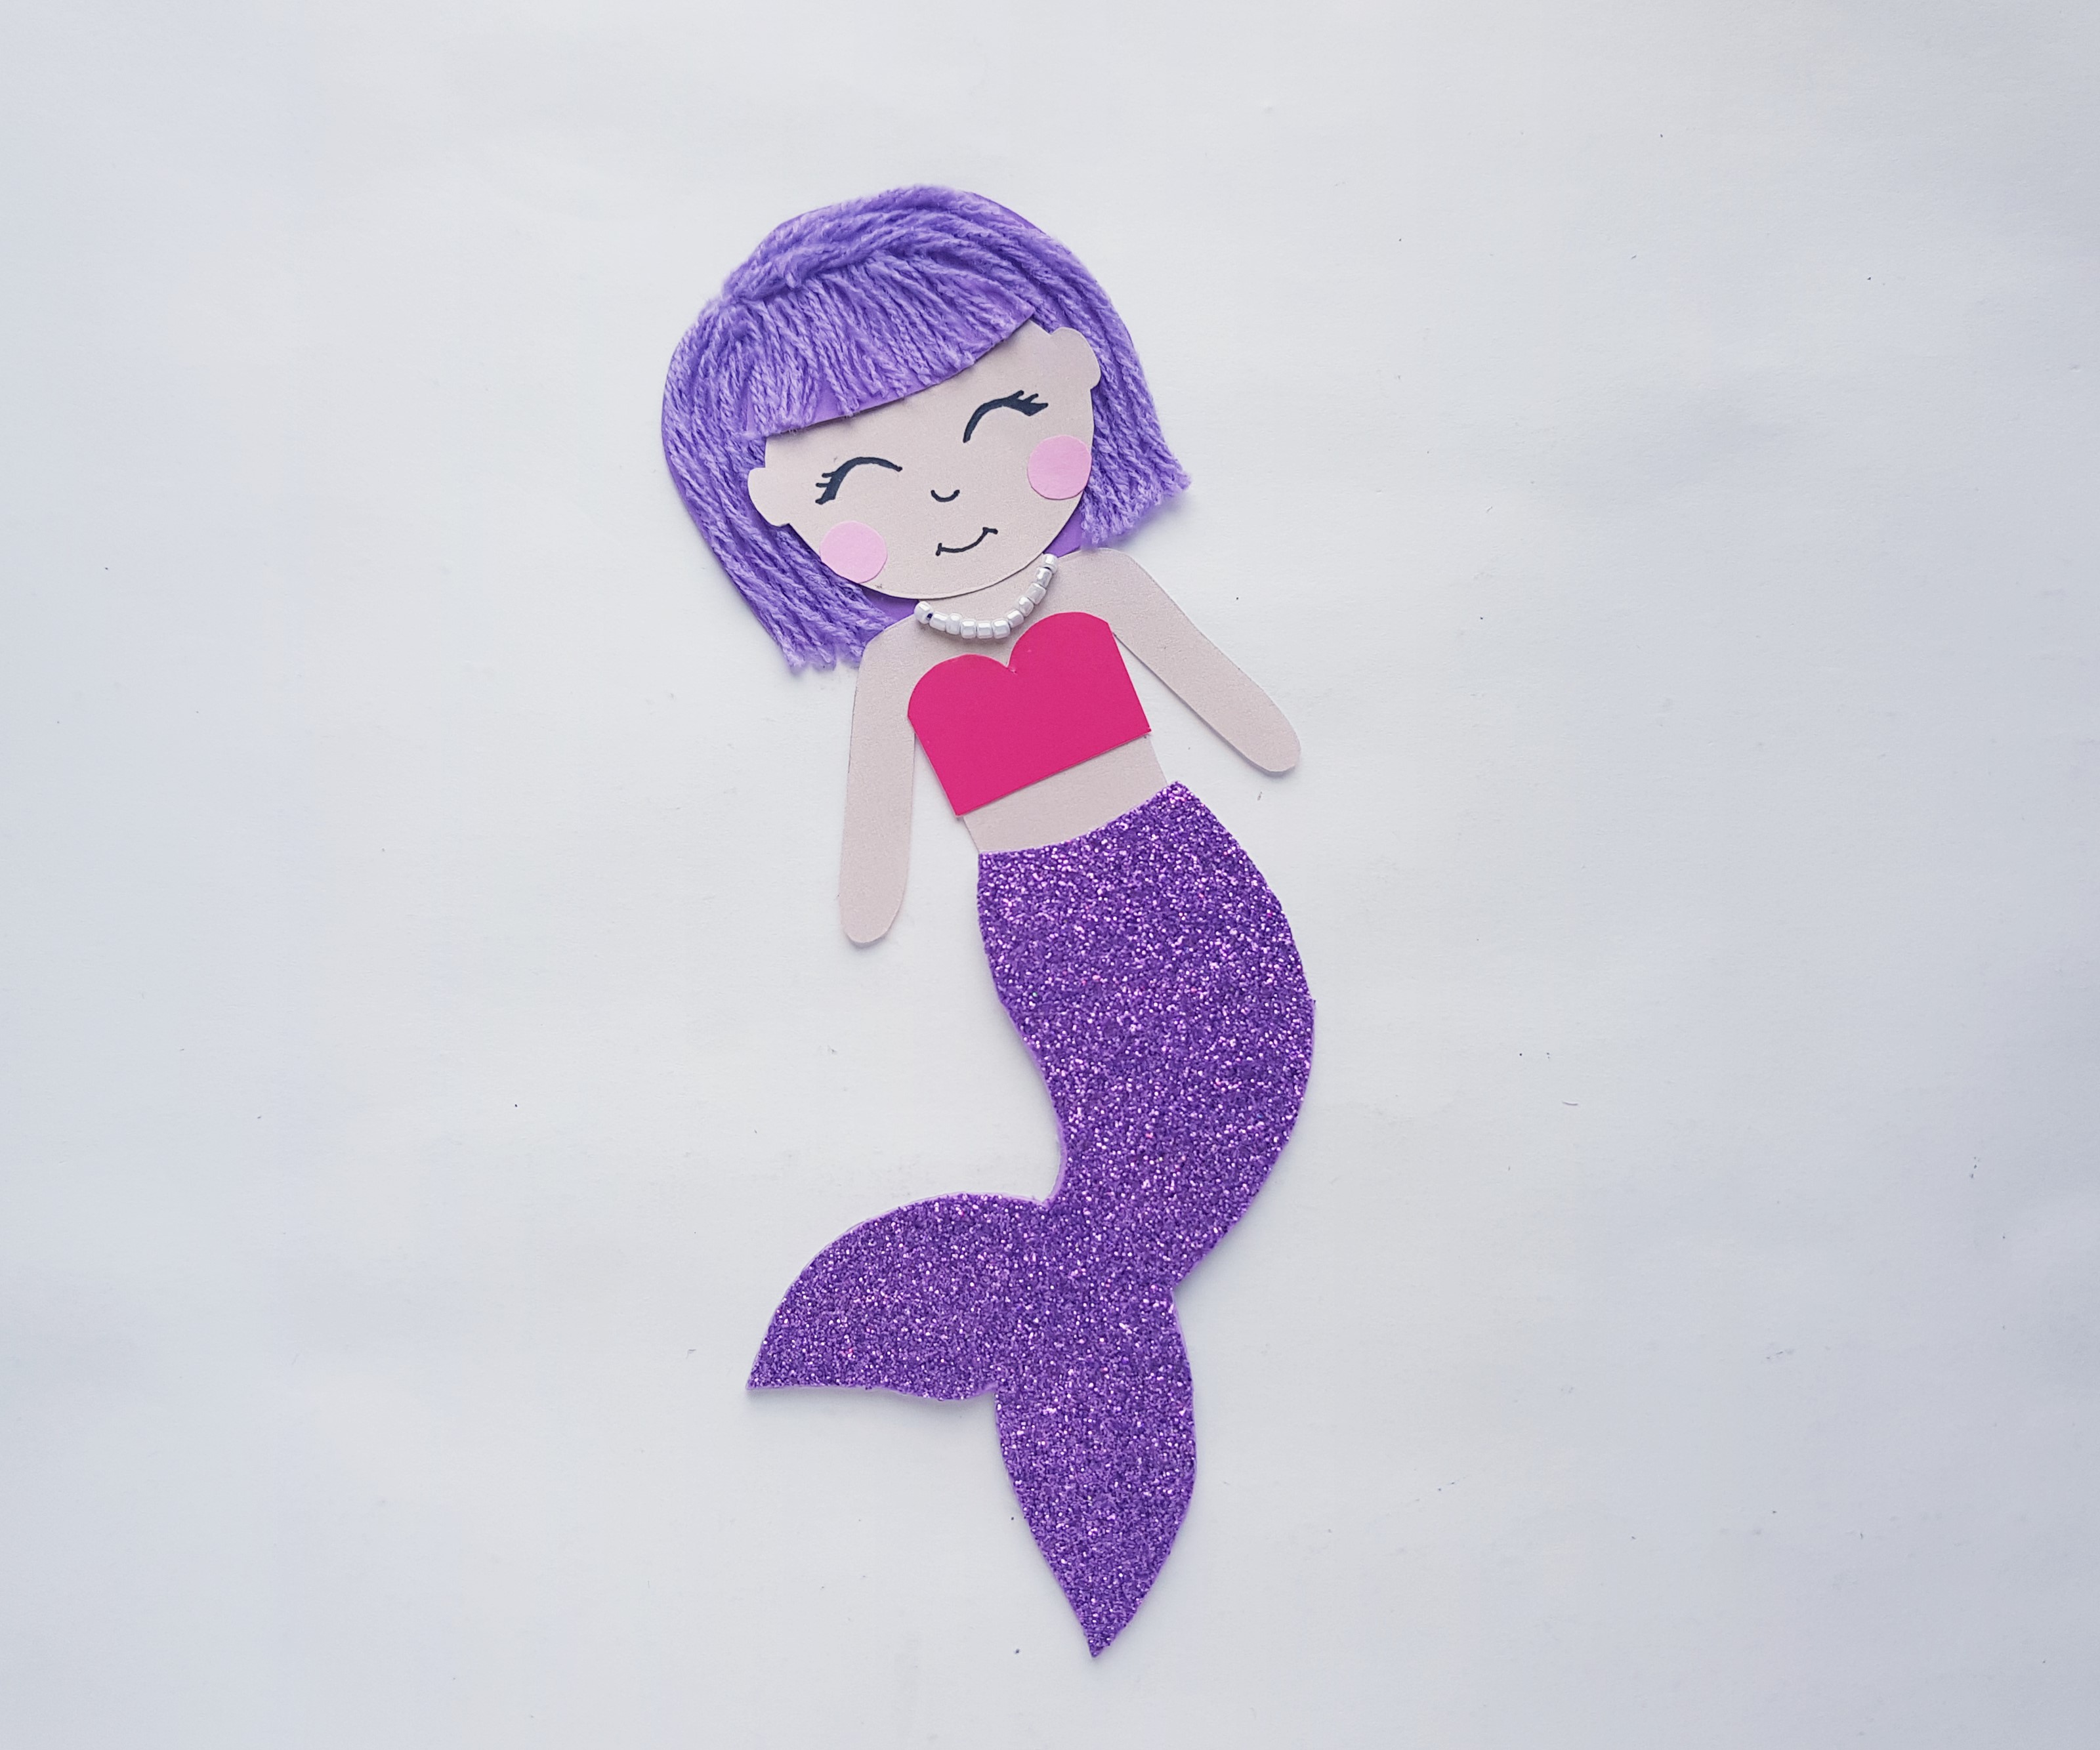 Beautiful Mixed Media Mermaid Doll Craft for Kids to Make